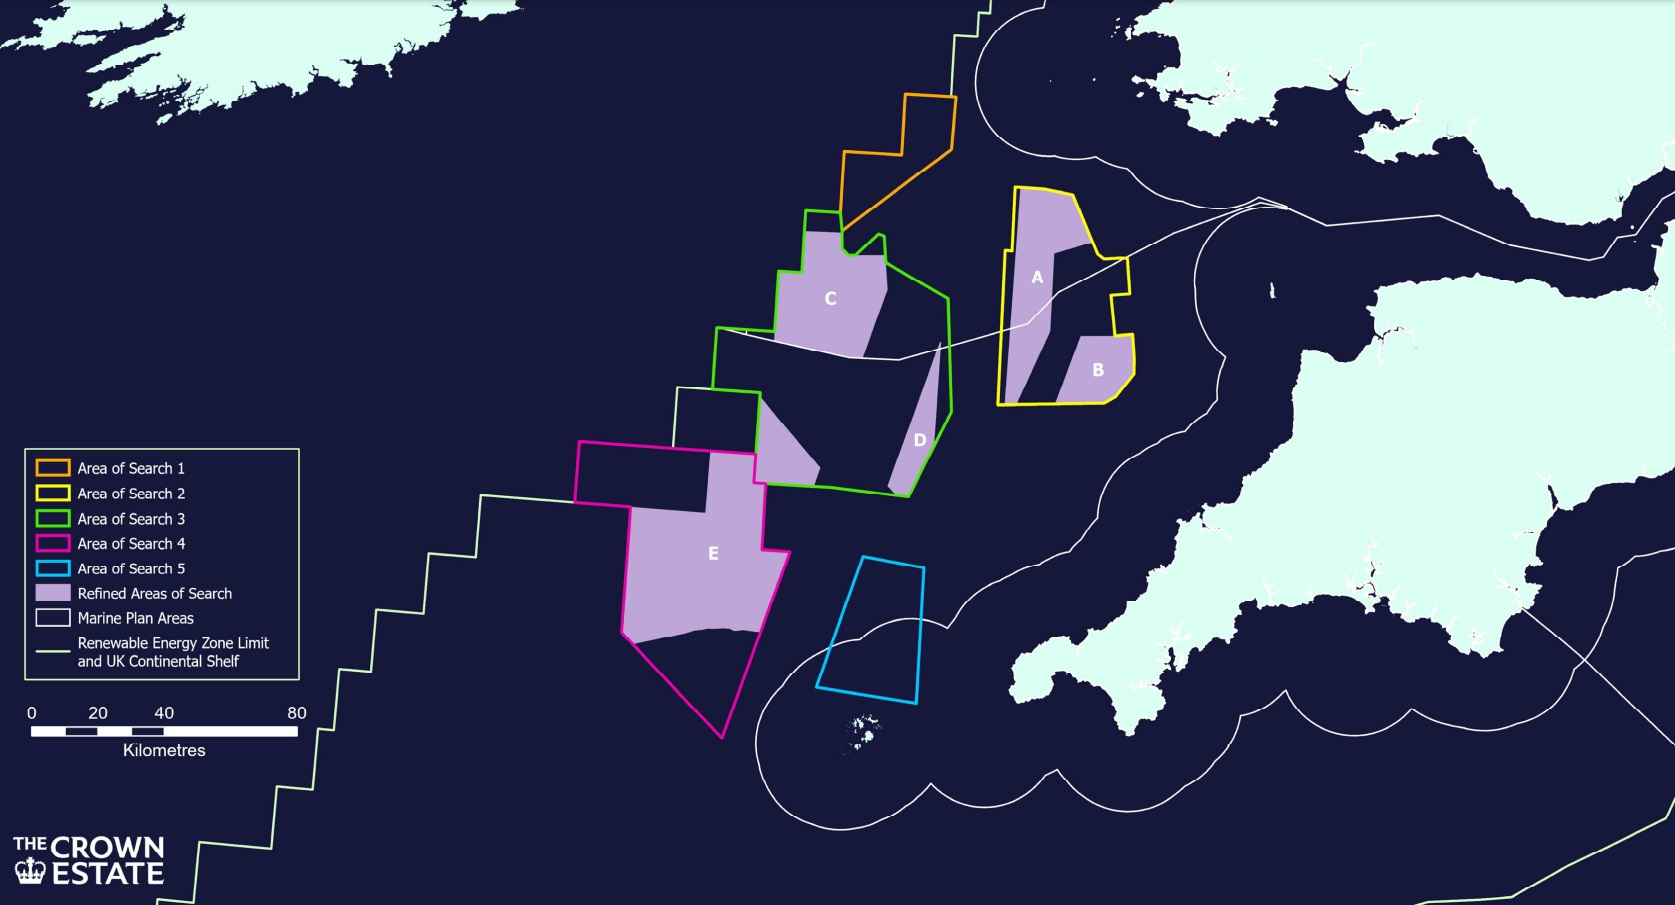 UK Celtic Sea: Refined search areas for offshore wind